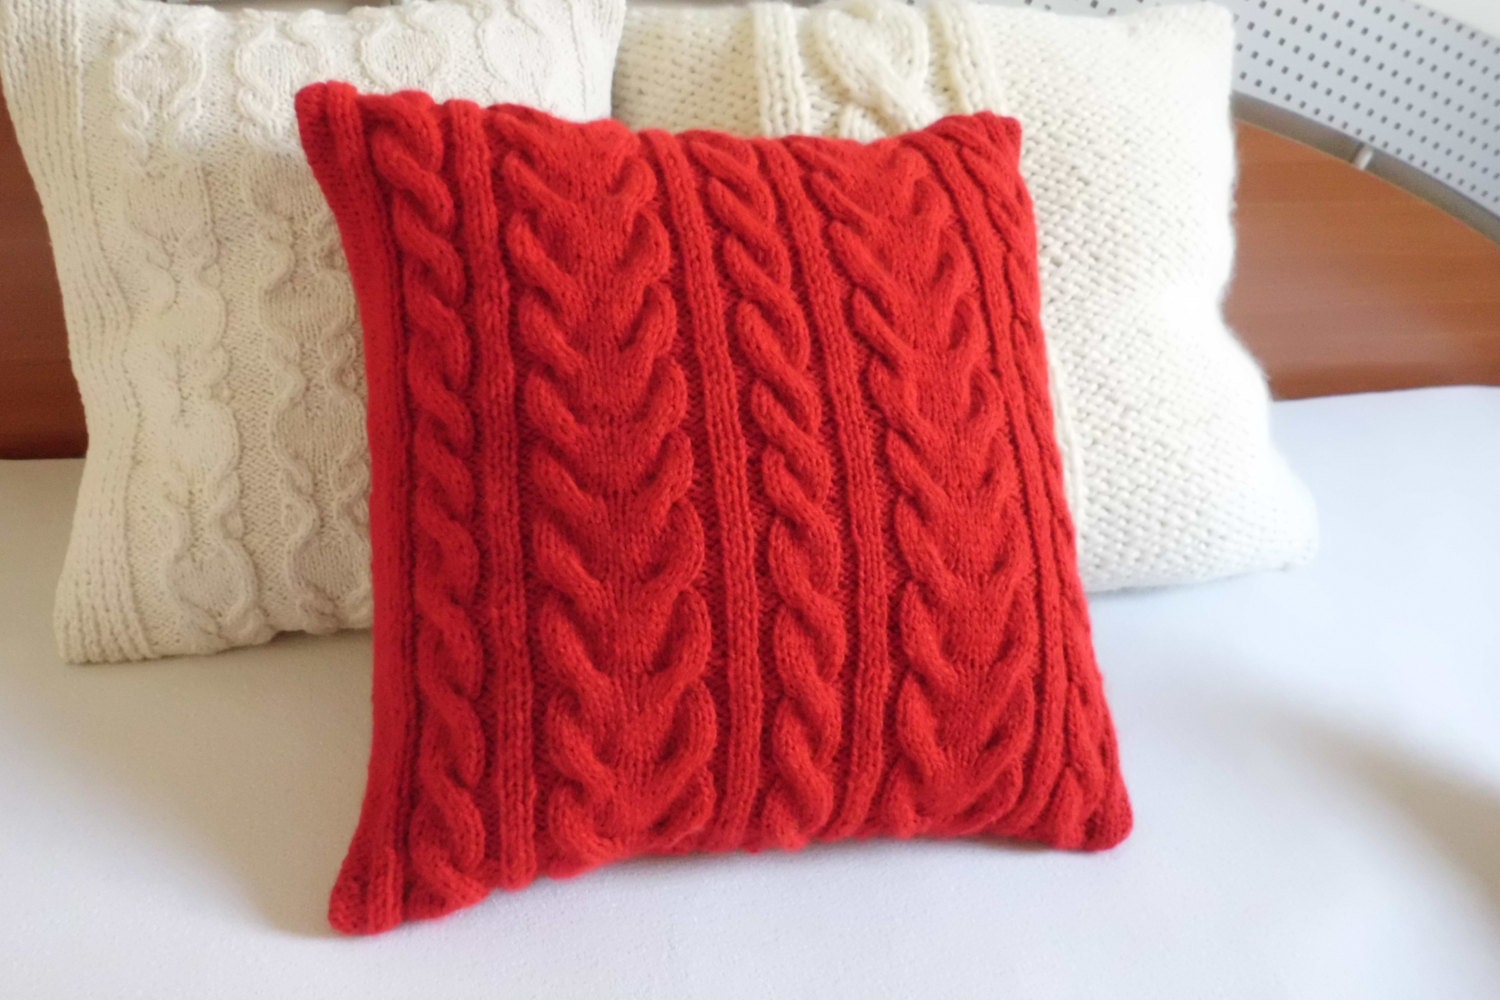 Pure Red Cable Knit Throw Pillow Hand Knit Pillow Cover Knit